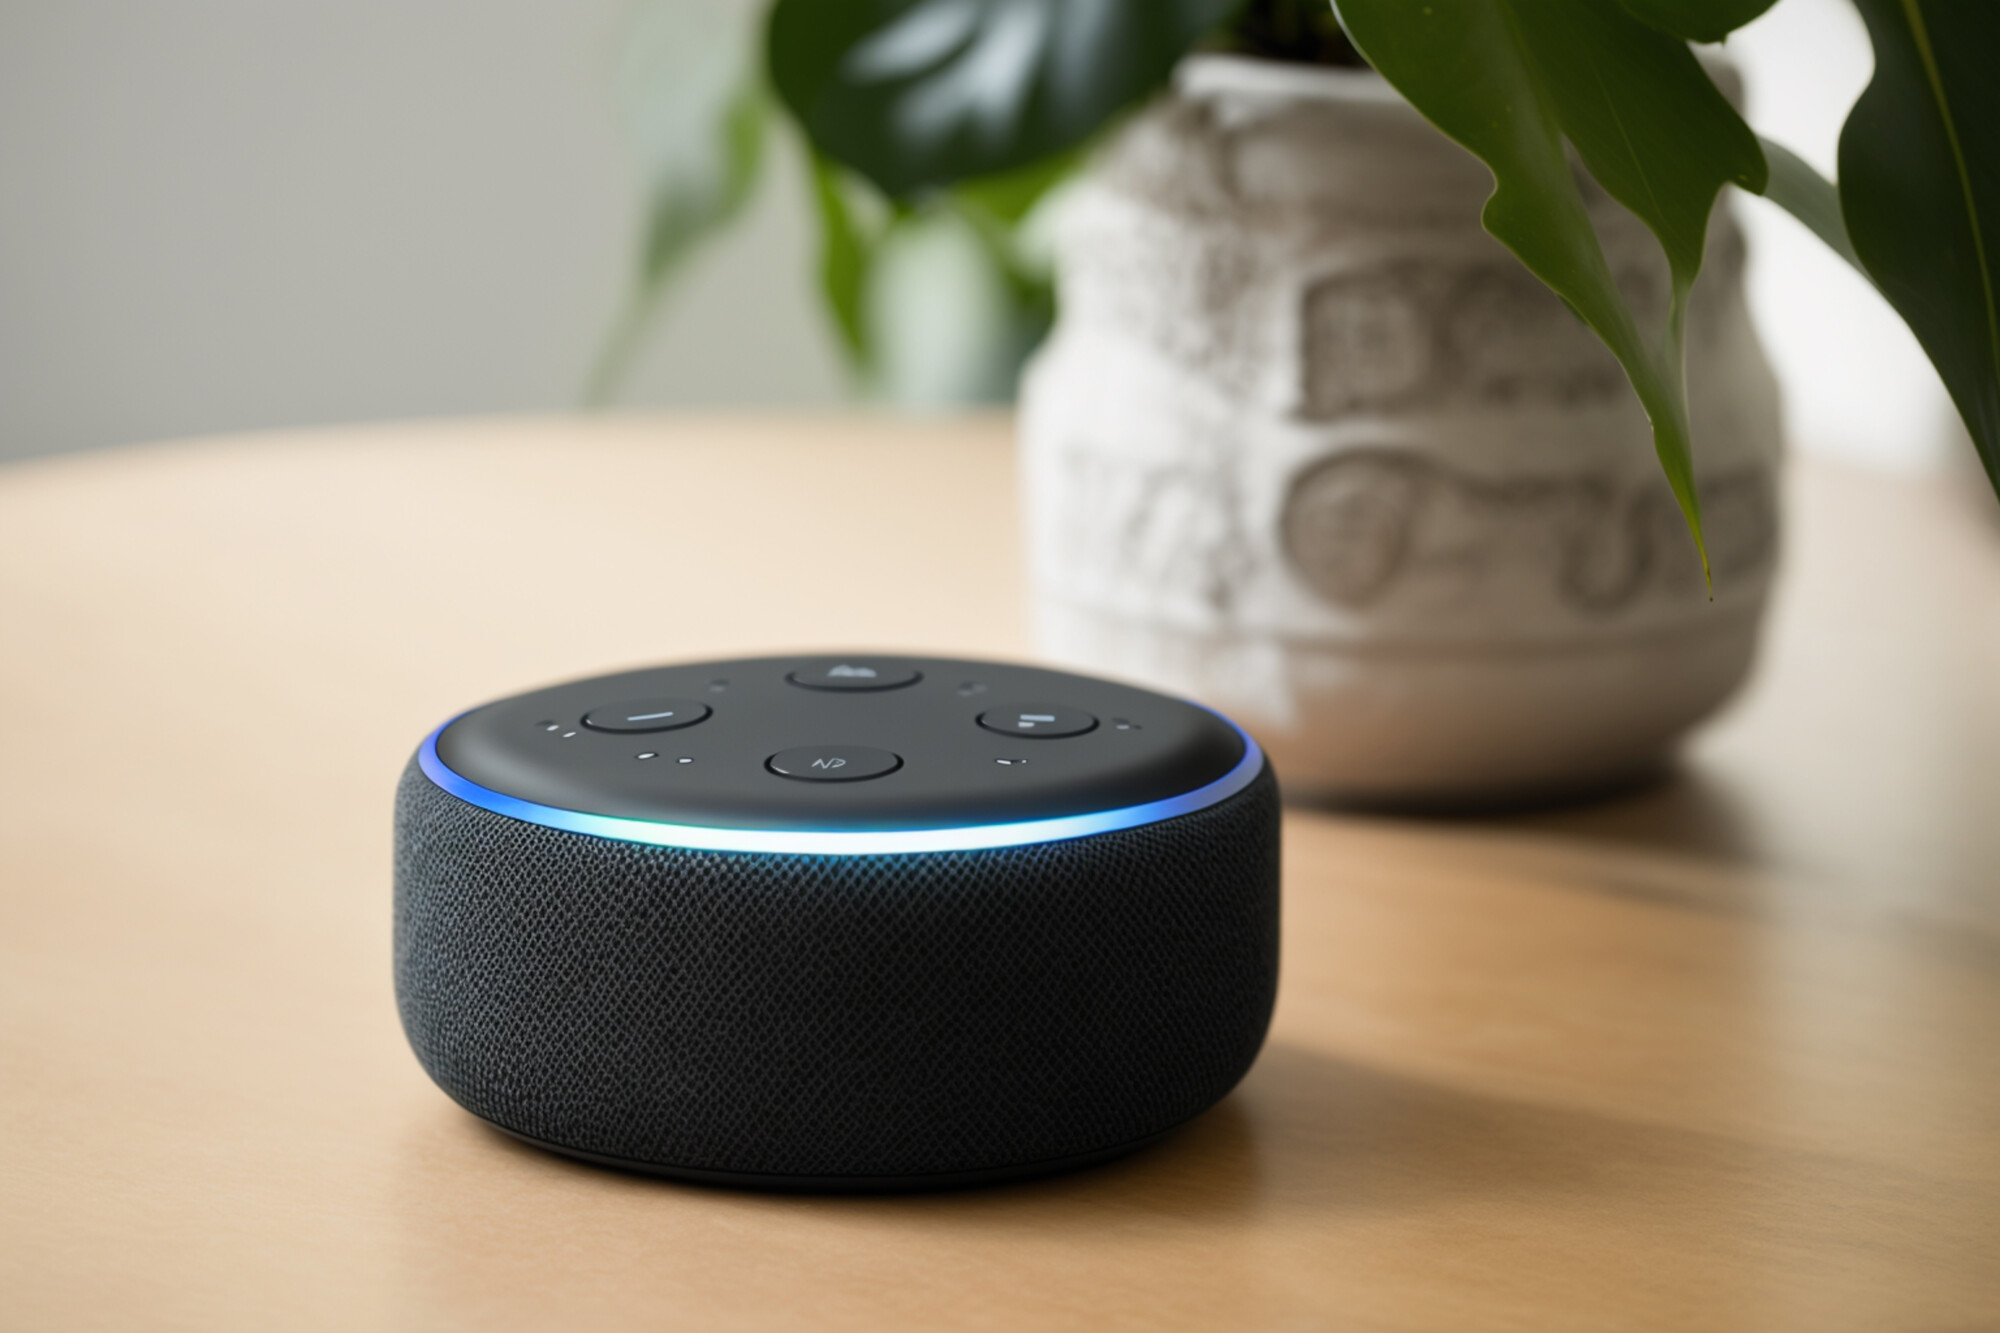 Echo from Amazon Alexa on the table. Alexa is a virtual personal assistant developed by Amazon with the aim of assisting in the execution of some everyday tasks. The user interacts through speech. It is an example of AI technology.